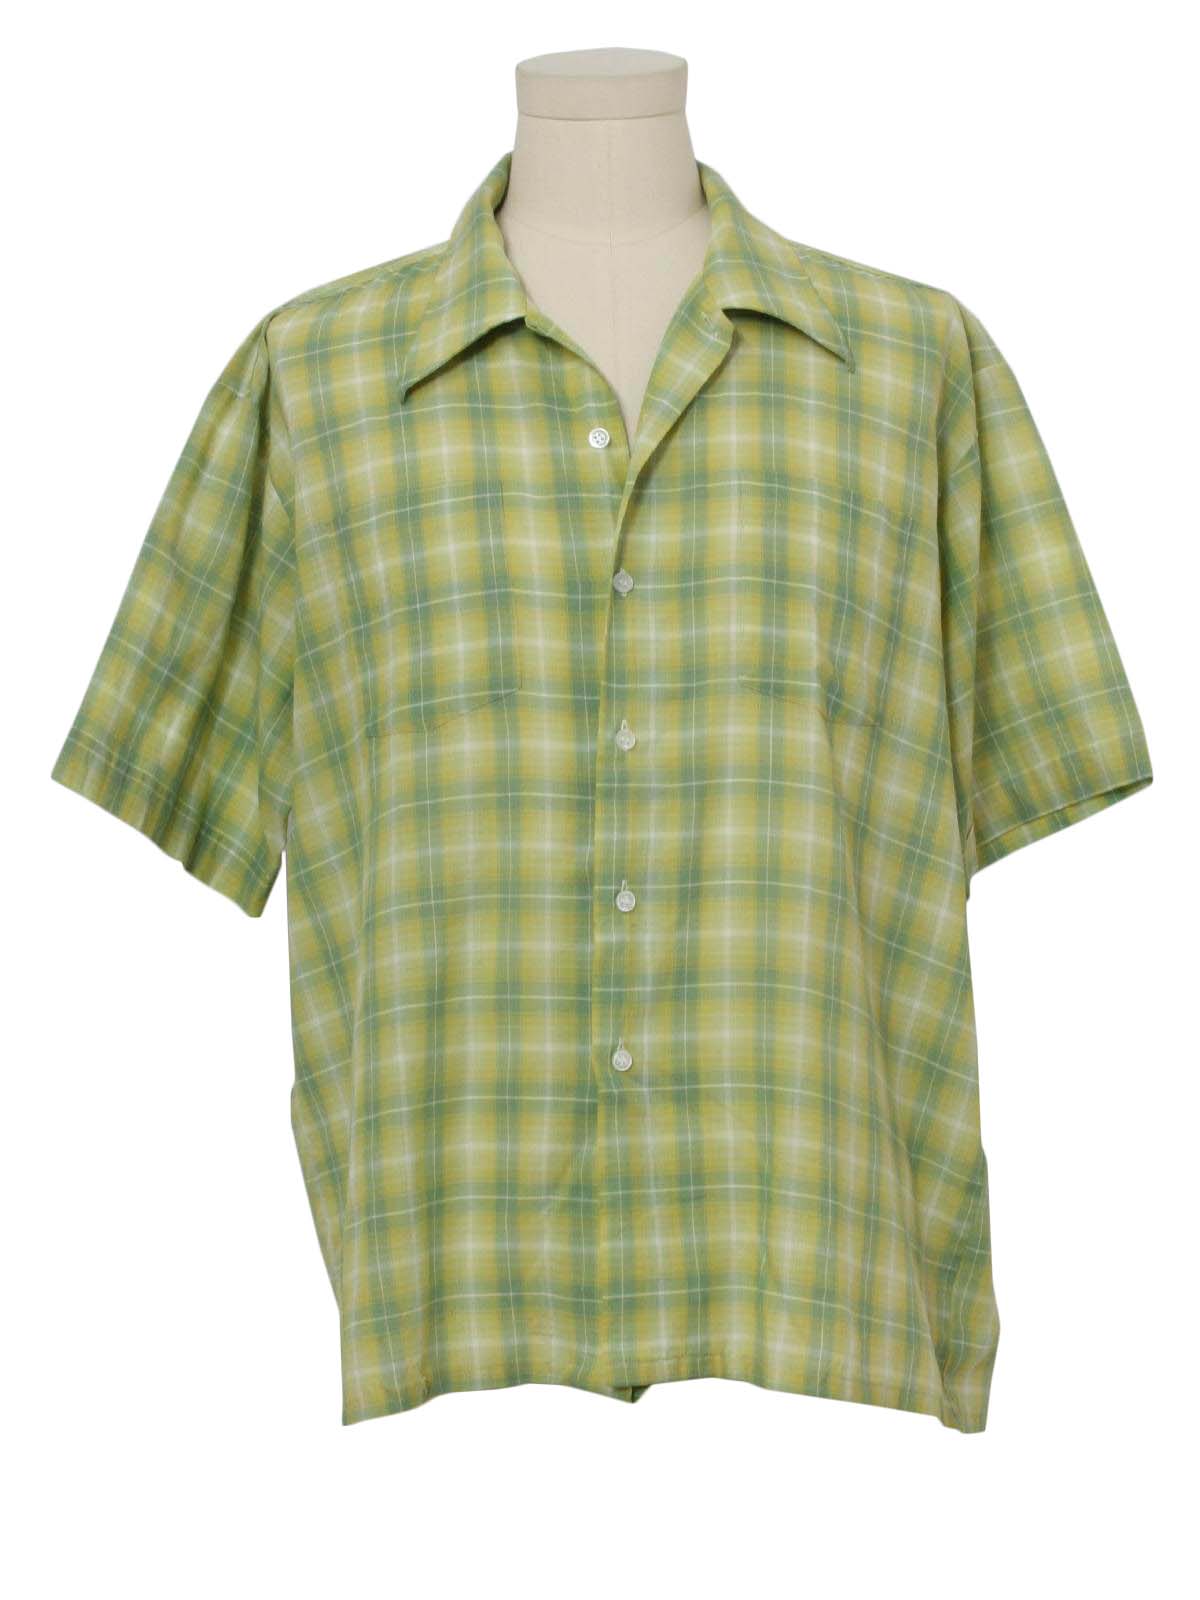 Retro 70's Shirt: Early 70s -Missing Label- Mens shaded green, yellow ...